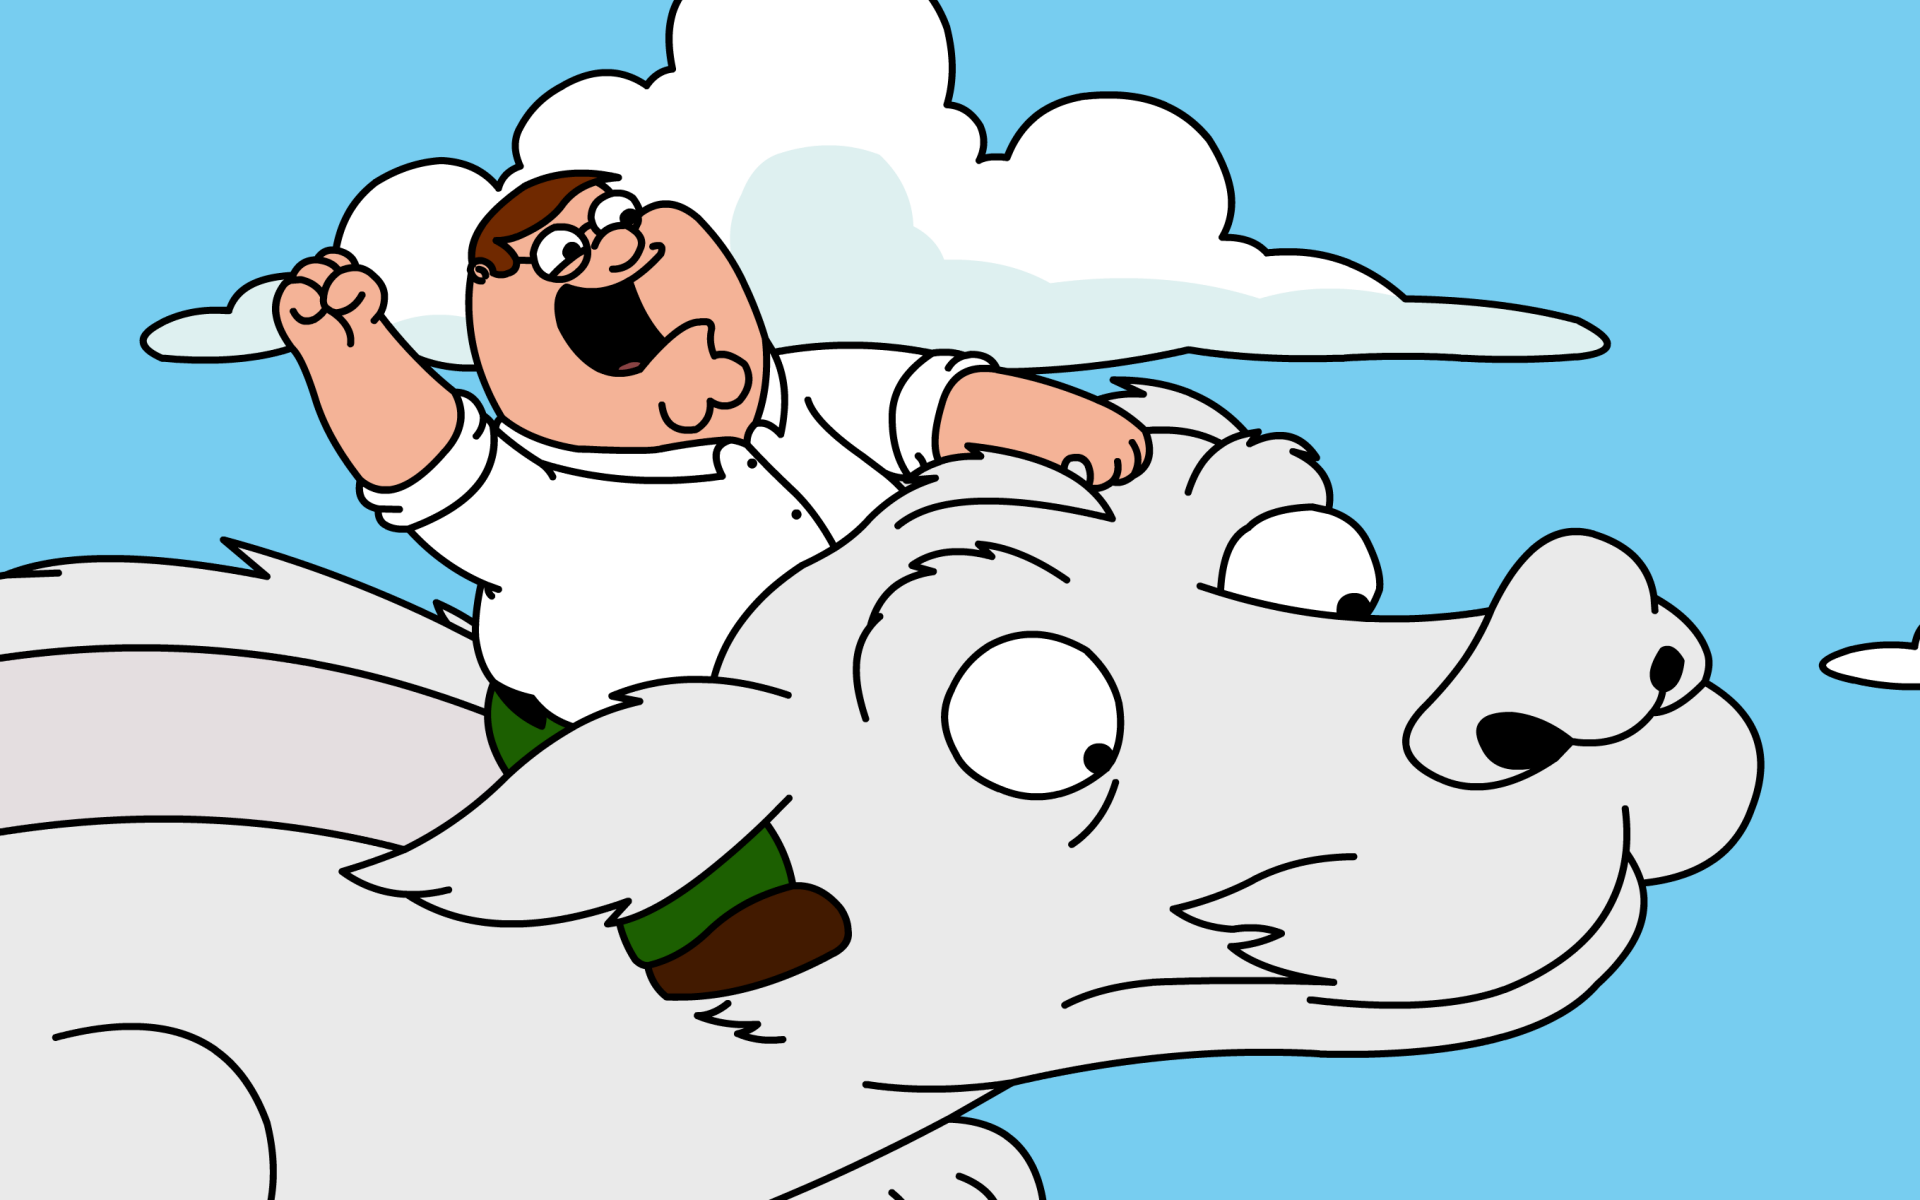 peter_neverending_story_1920x1200.png